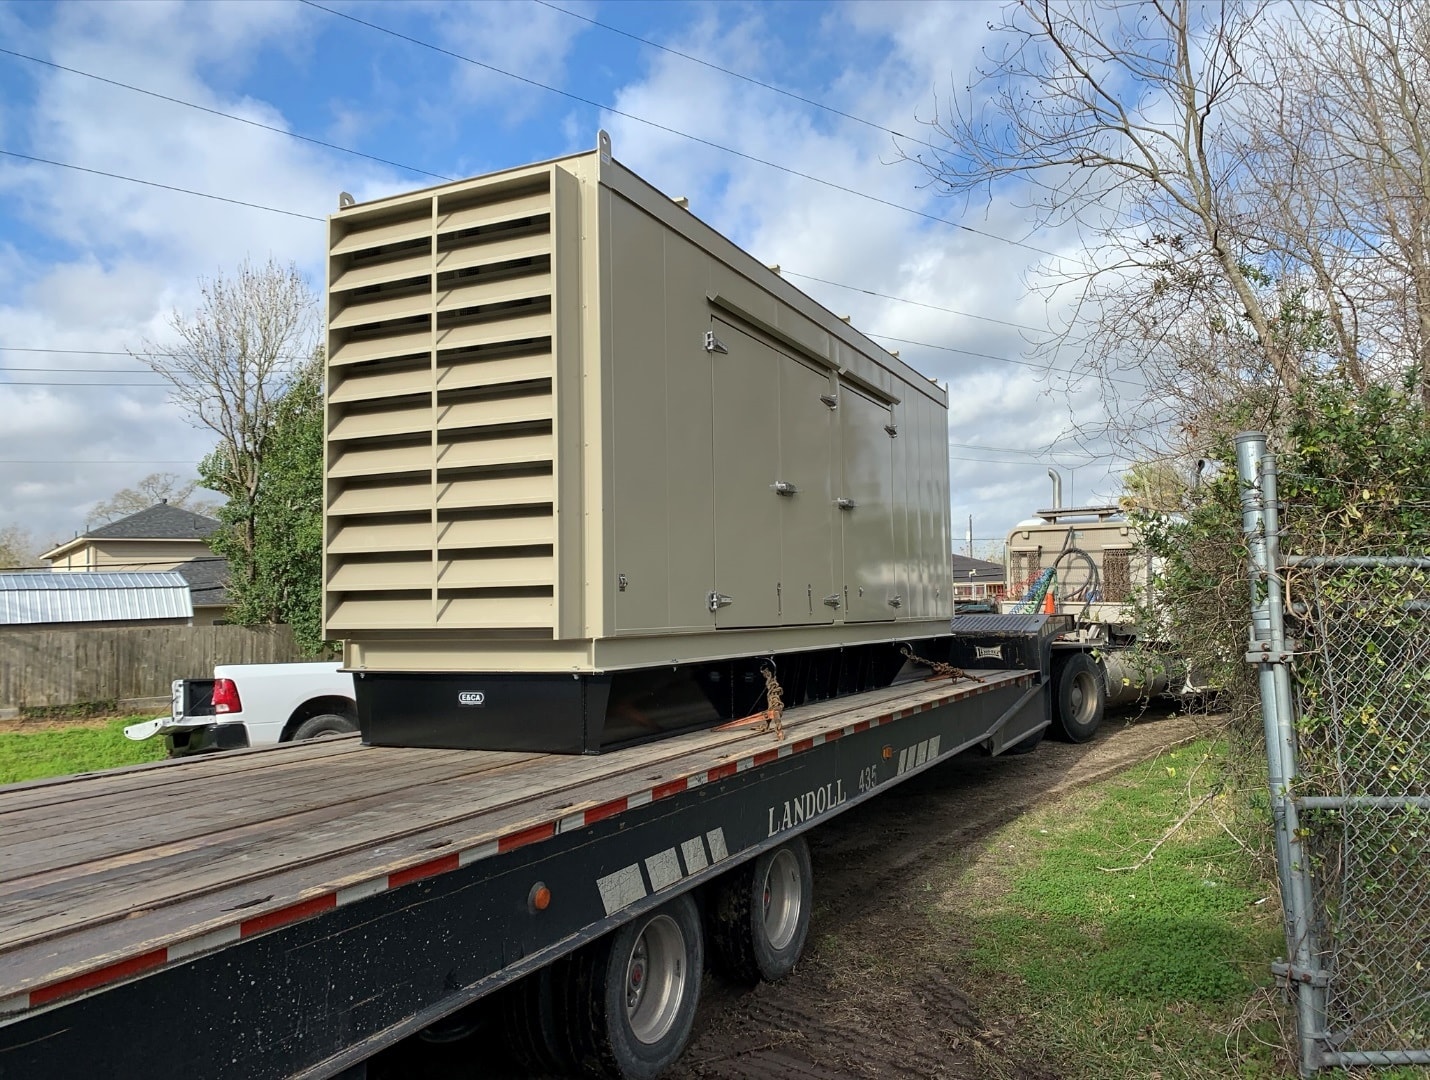 Case Study: Multiple Houston MUDs - Worldwide Power Products